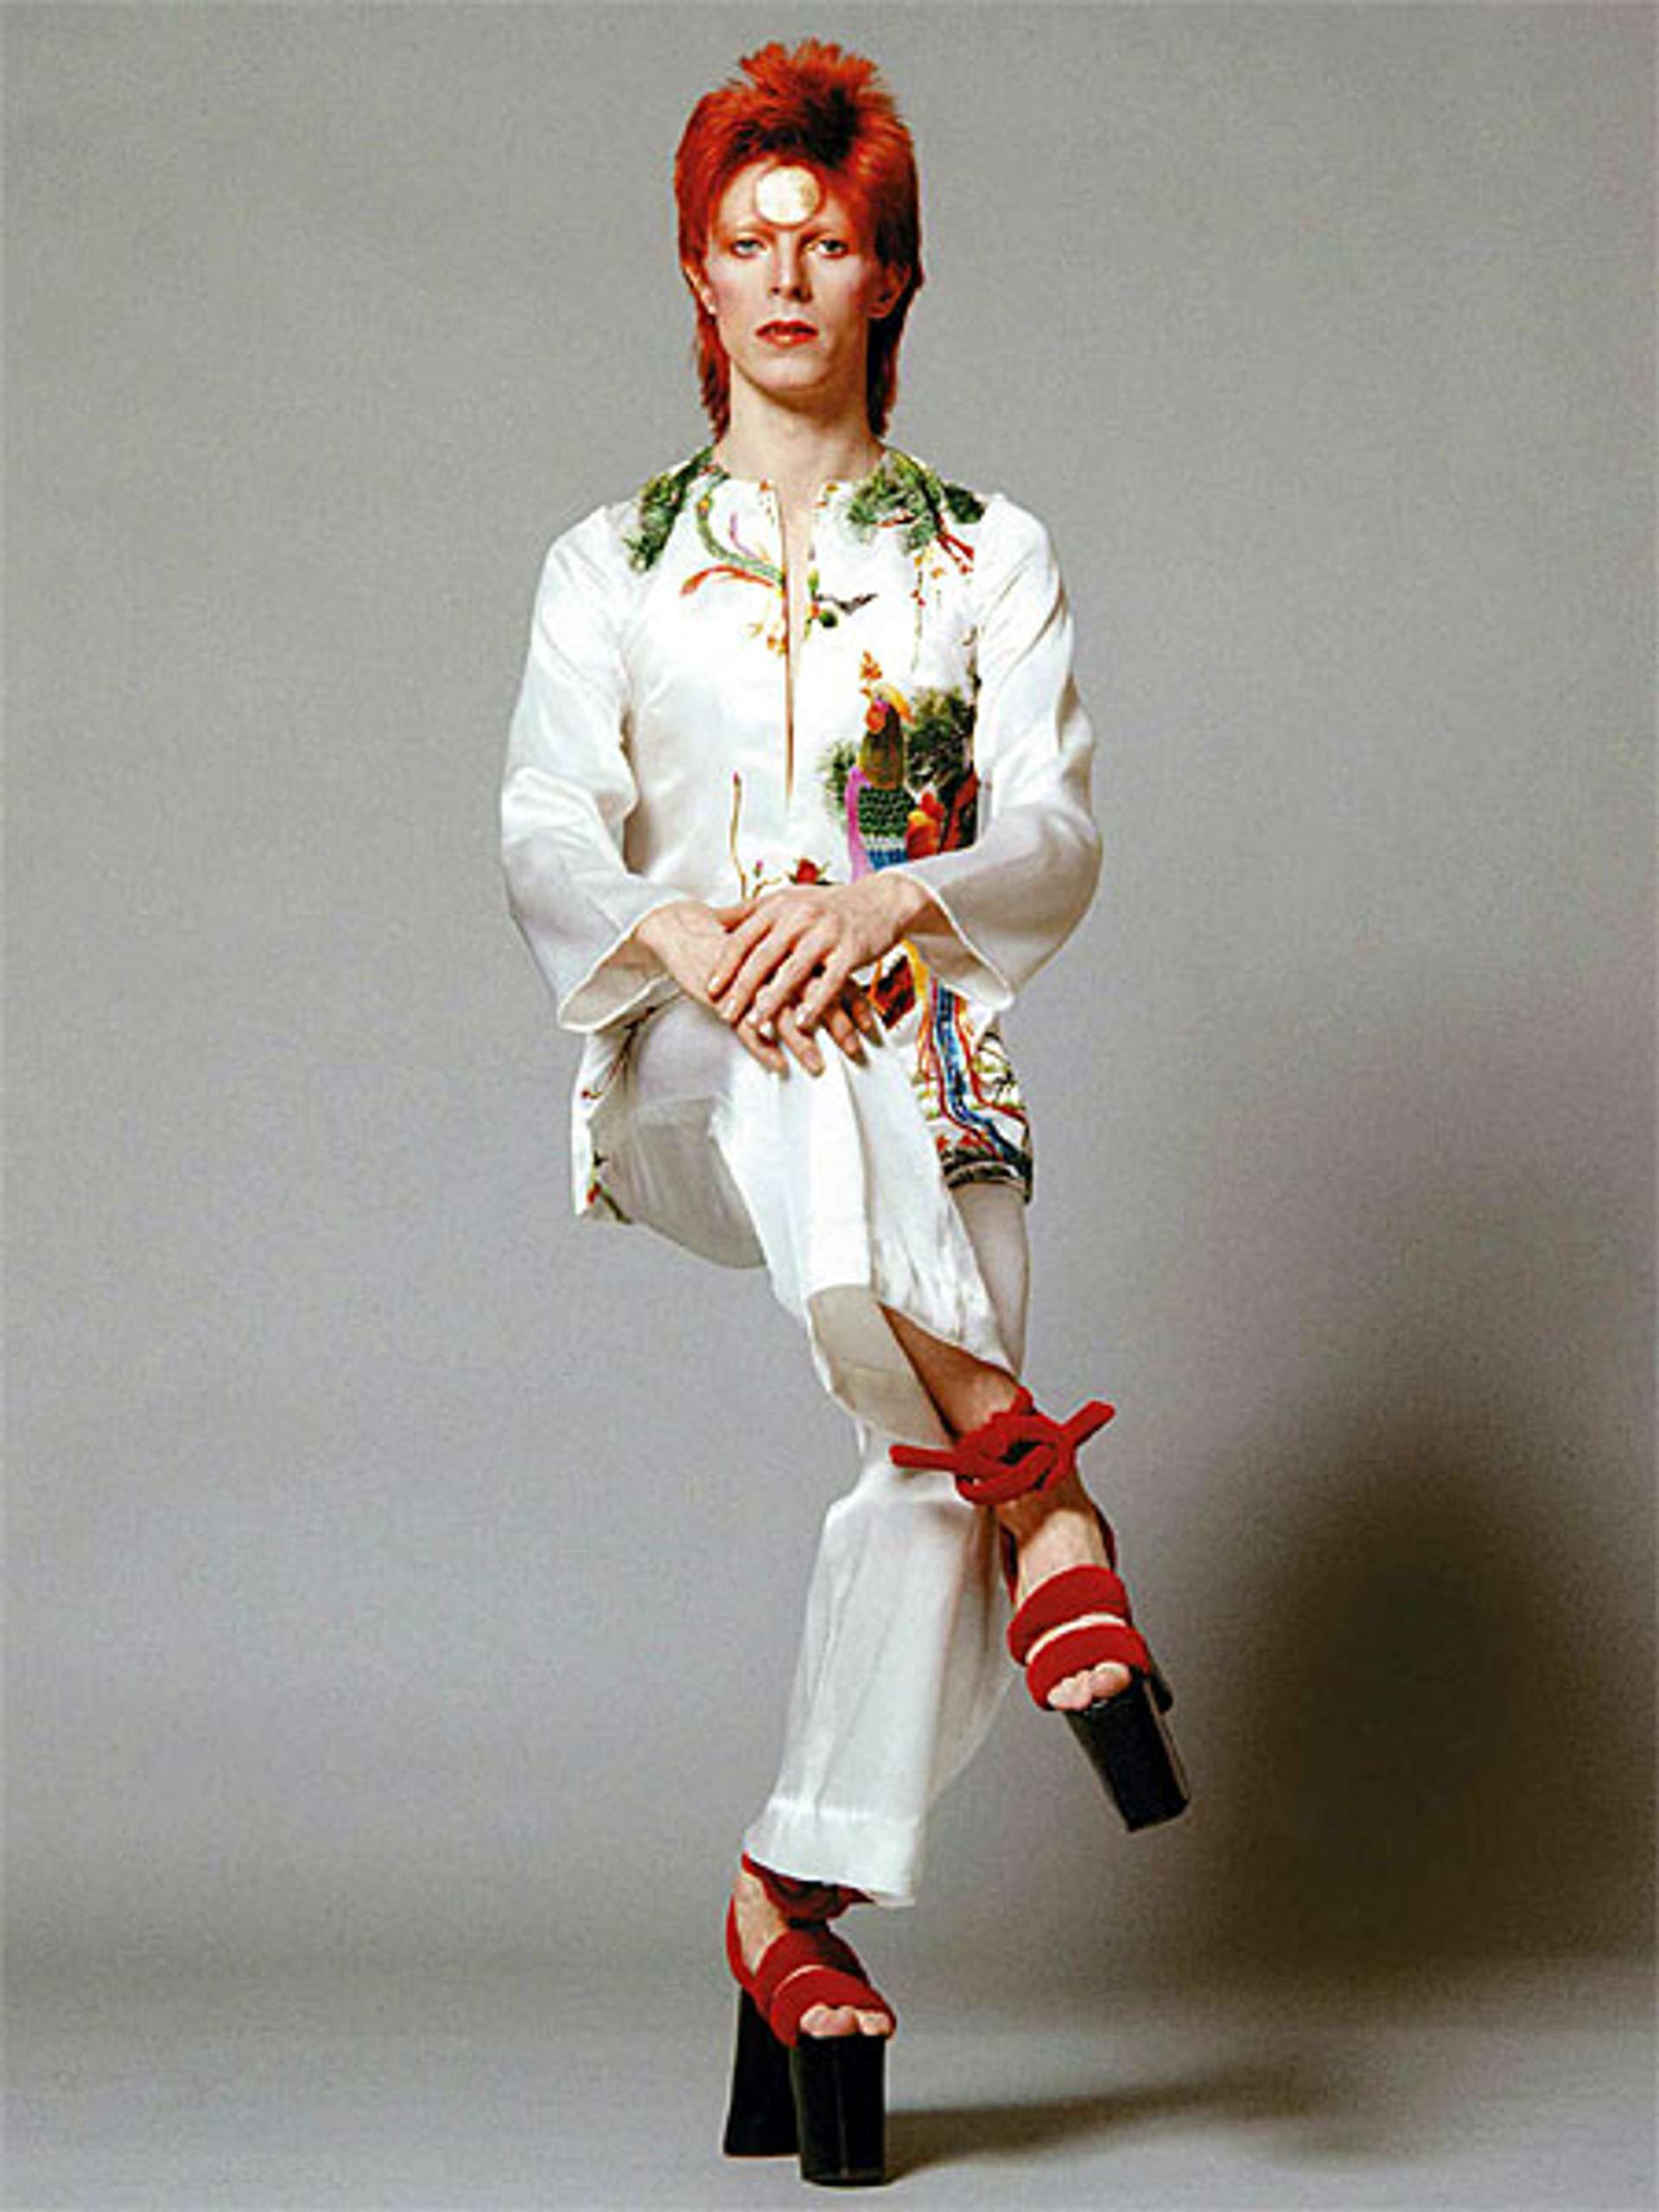 Photograph of David Bowie demonstrating a mime style sitting pose.